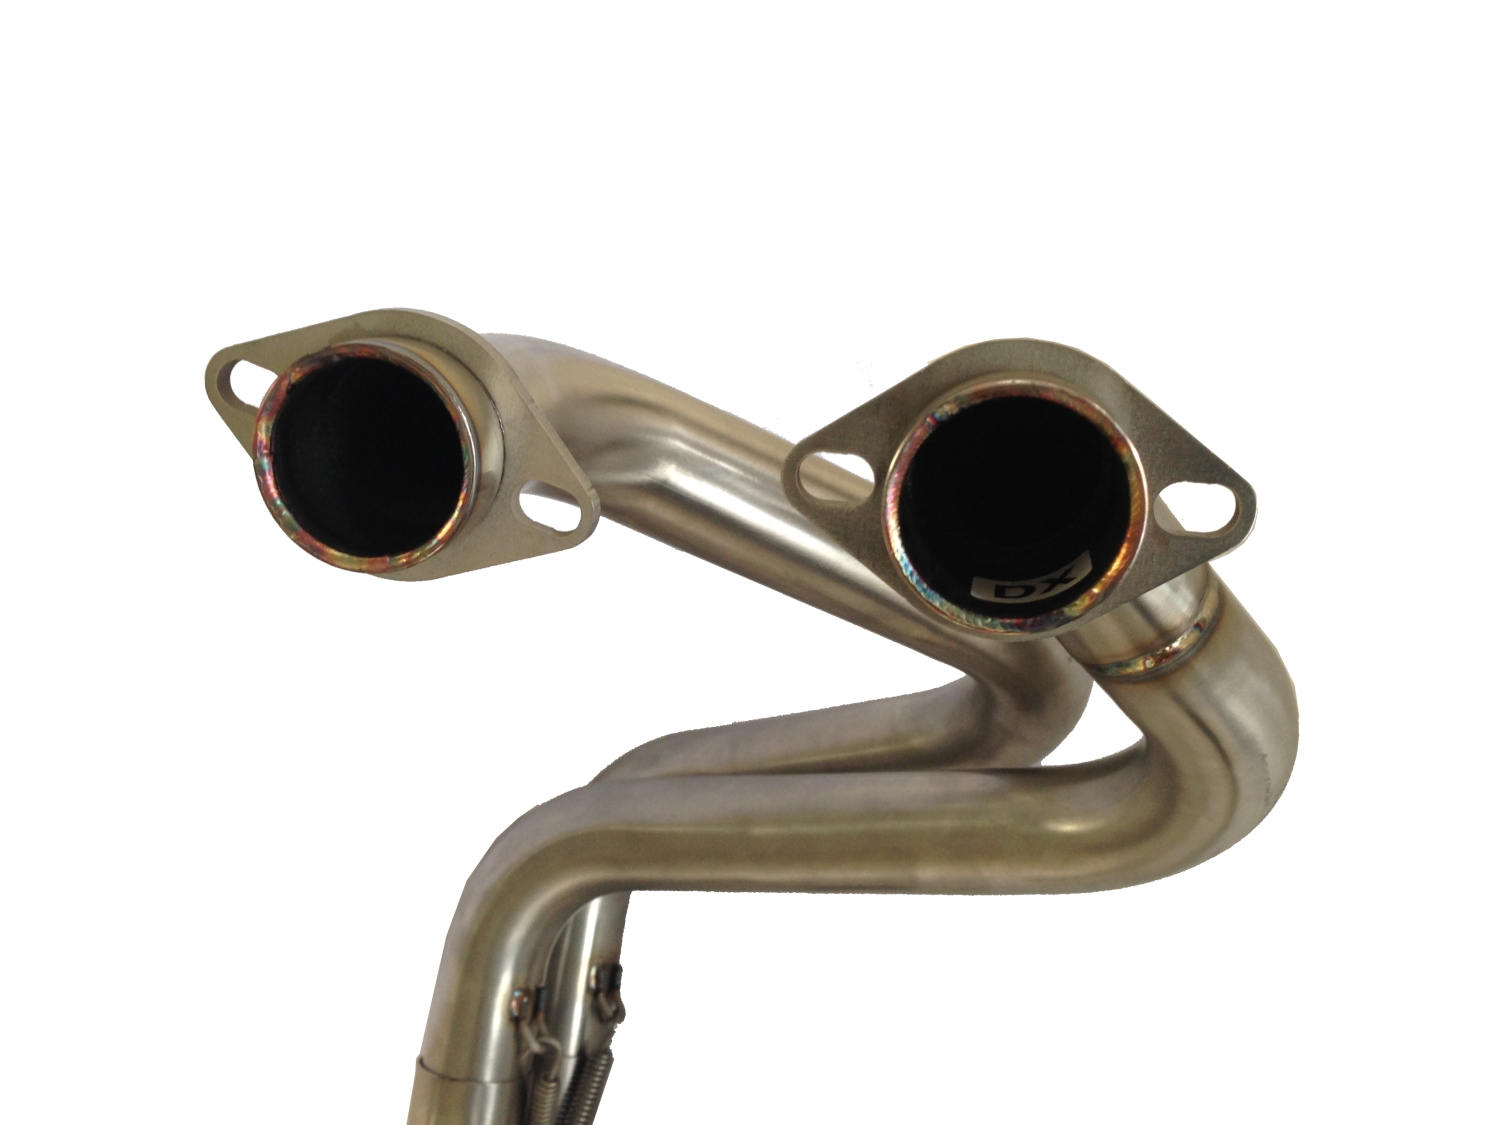 Exhaust system compatible with Kawasaki Er 6 N - F 2012-2016, Satinox , Homologated legal full system exhaust, including removable db killer 